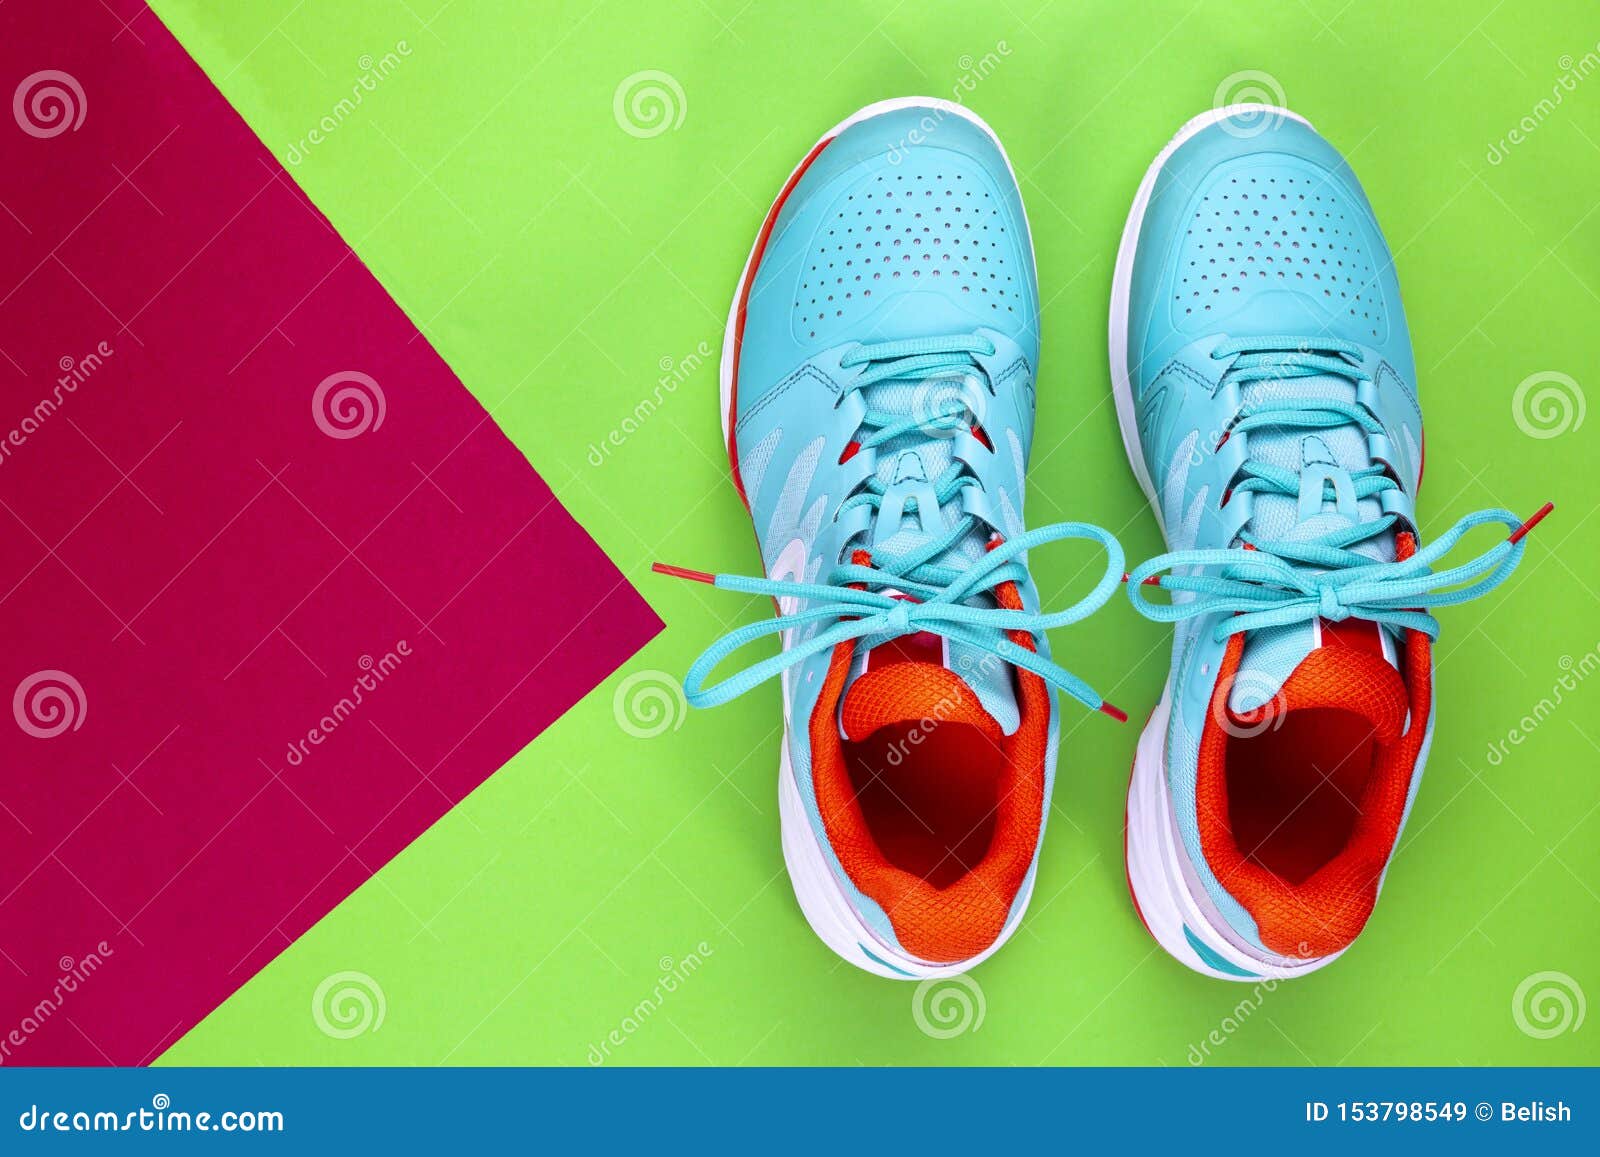 Tennis shoes in studio stock image. Image of background - 153798549